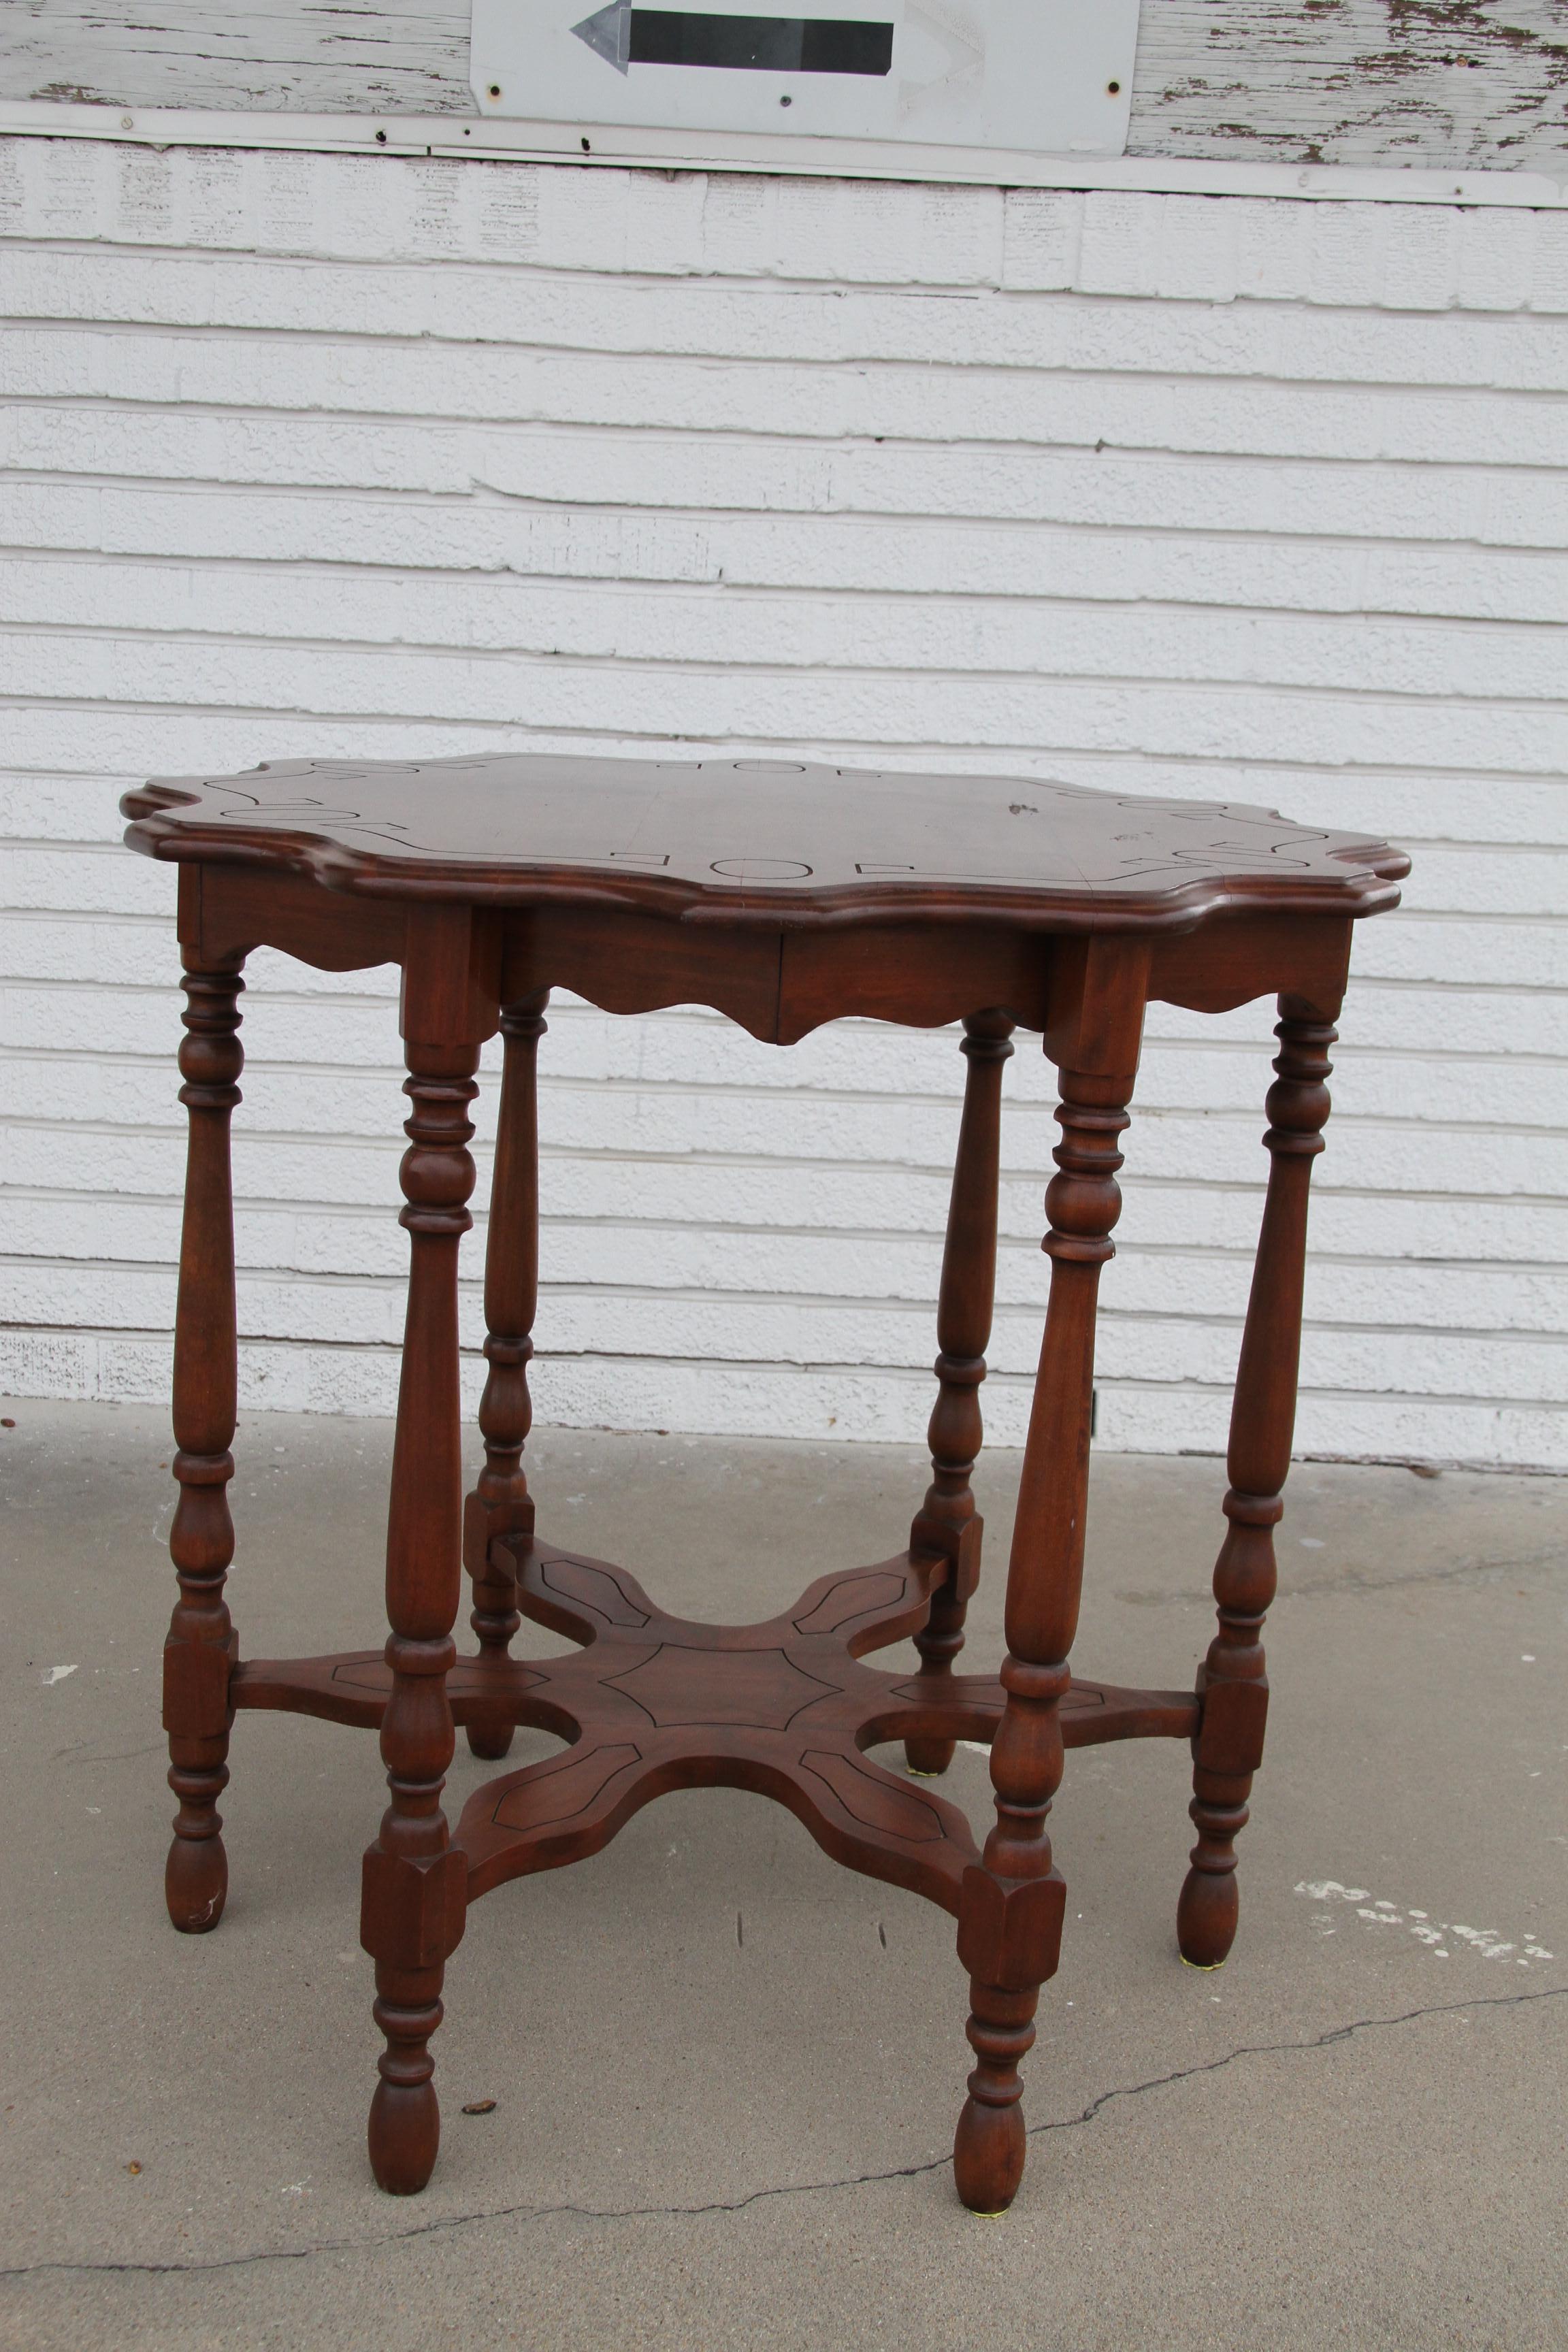 Vintage 6 Leg Scalloped Sided Table In Good Condition For Sale In Pasadena, TX